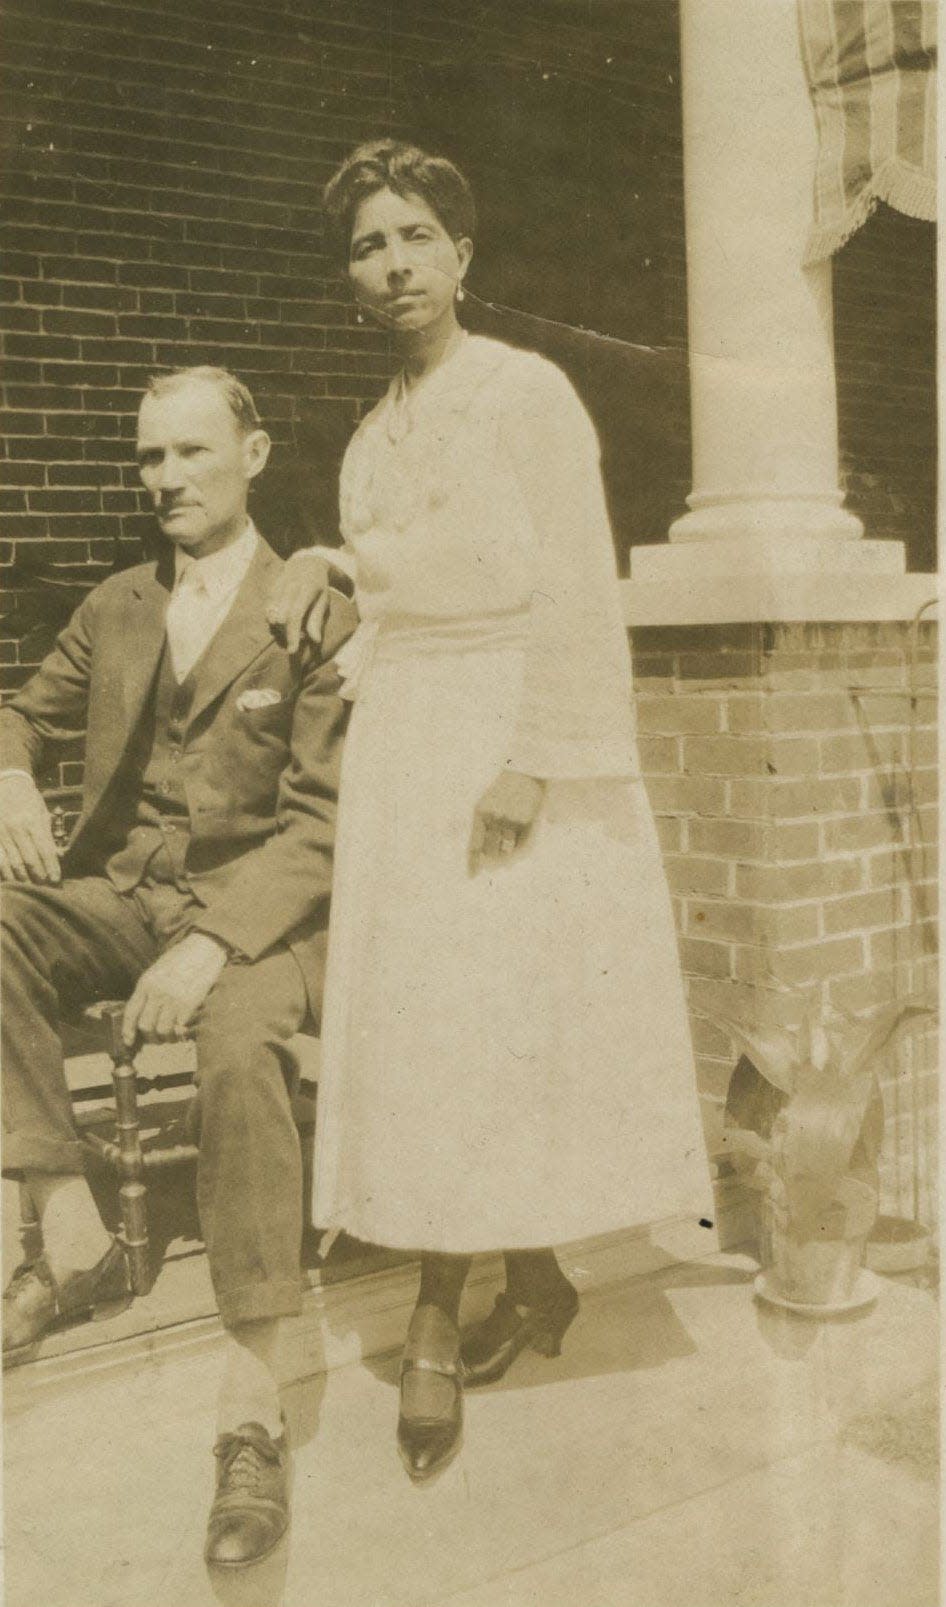 Alexander Lightfoot Manly, editor of the Daily Record, and Caroline "Carrie" Sadgwar Manly, circa 1920 in Philadelphia.